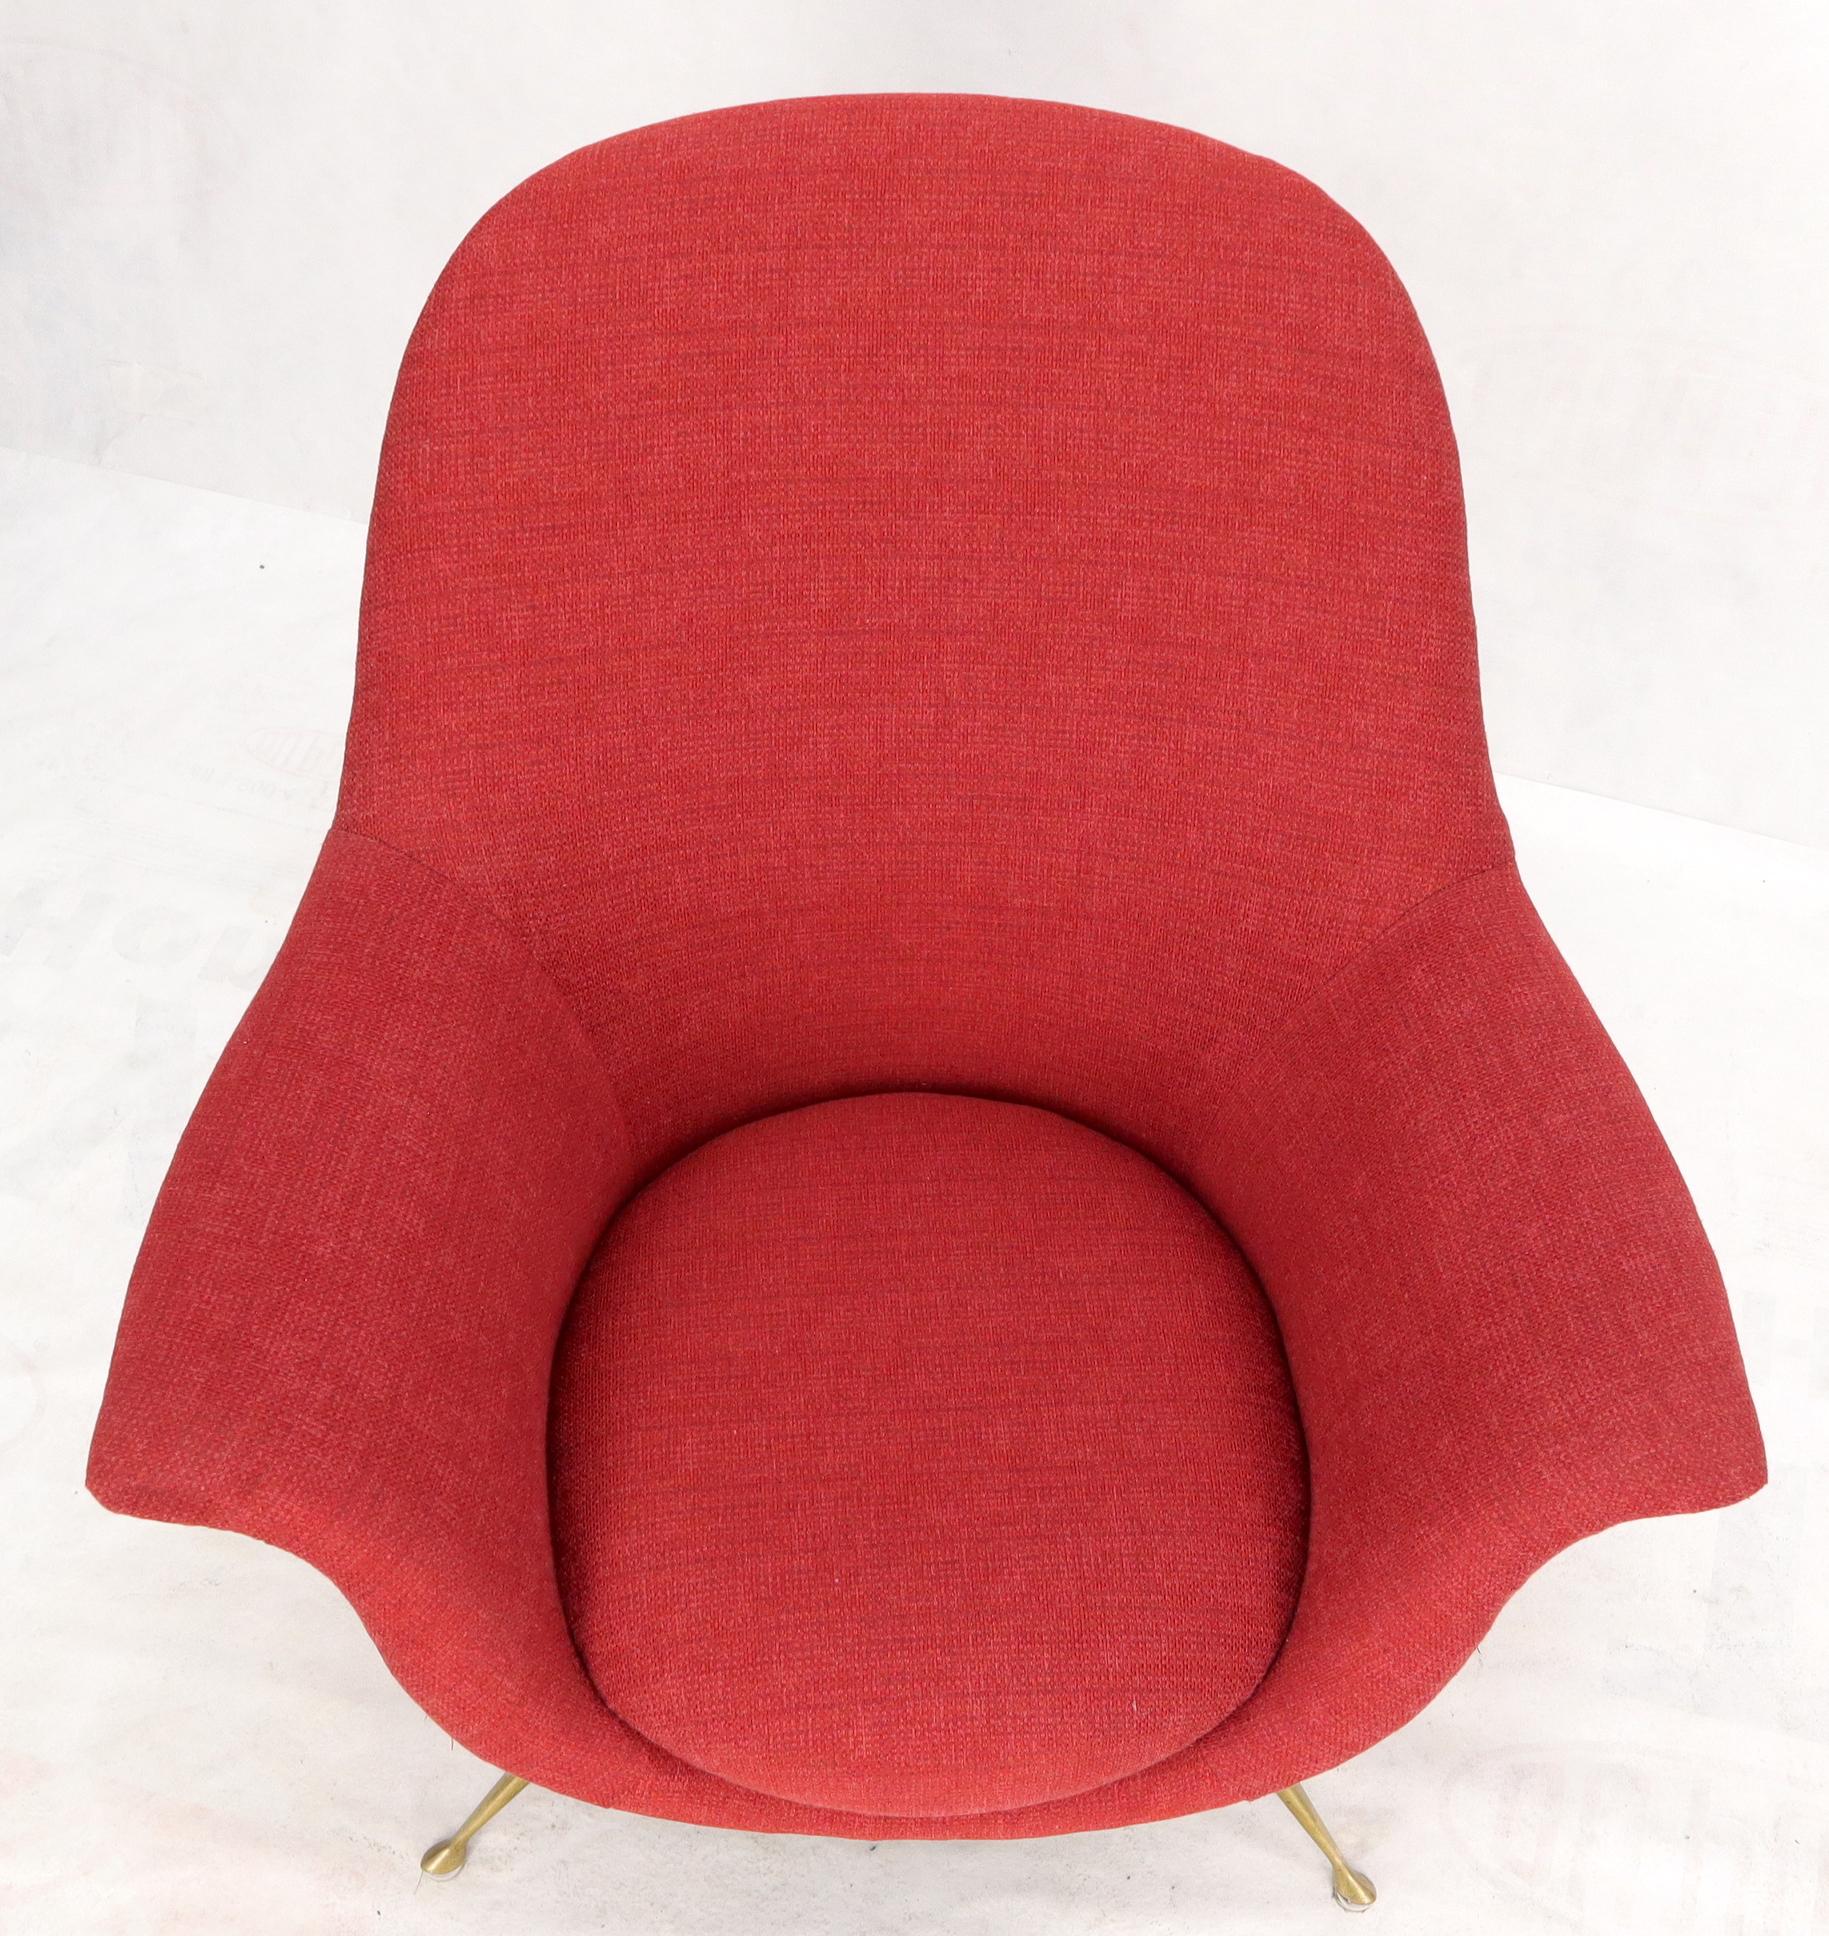 Italian Mid-Century Modern New Red Upholstery Lounge Chair on Solid Brass Legs For Sale 2